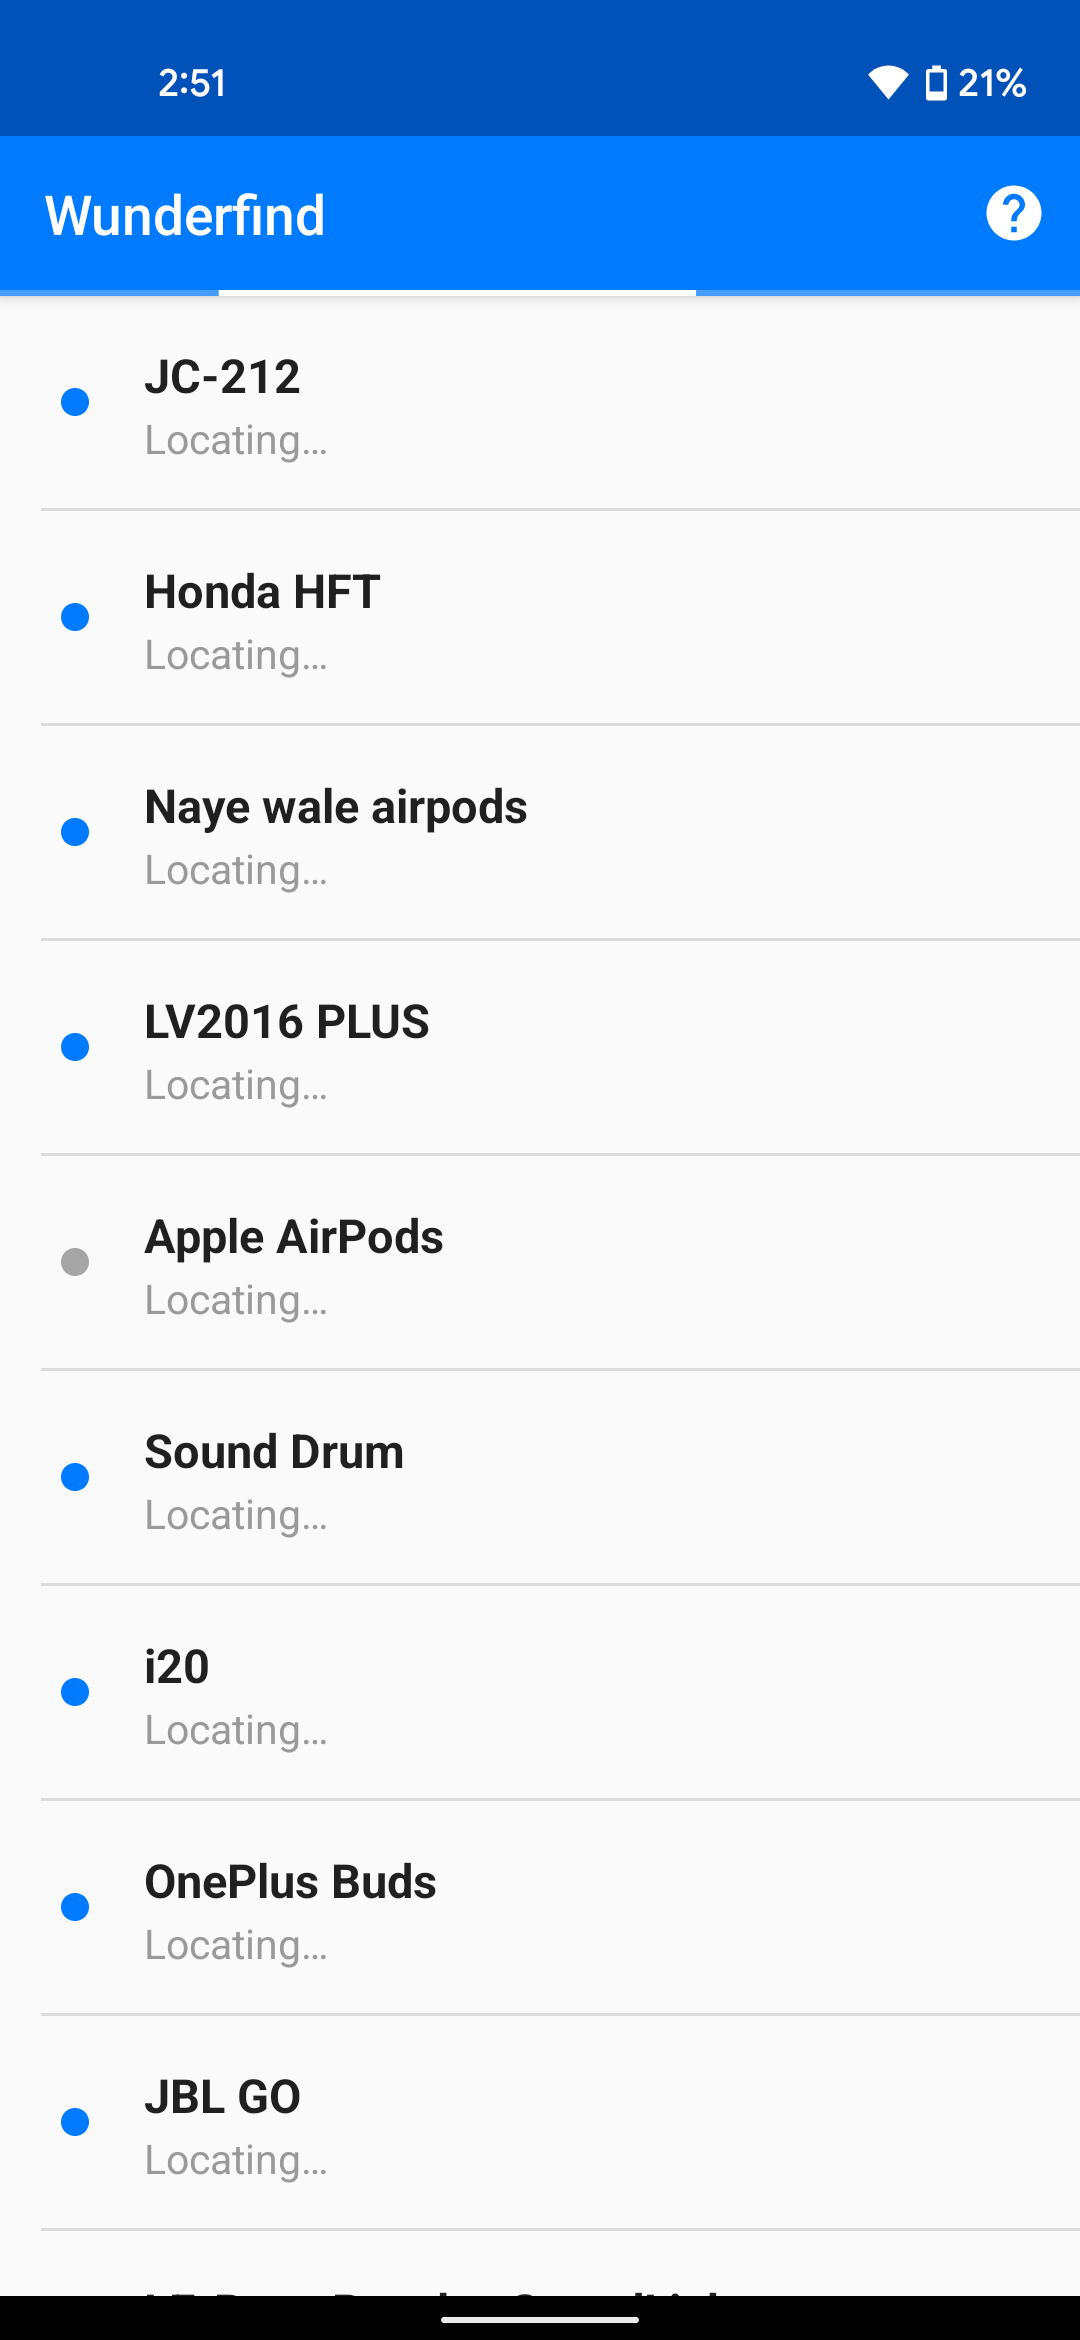 Wunderfind checking last location of all Bluetooth connected devices